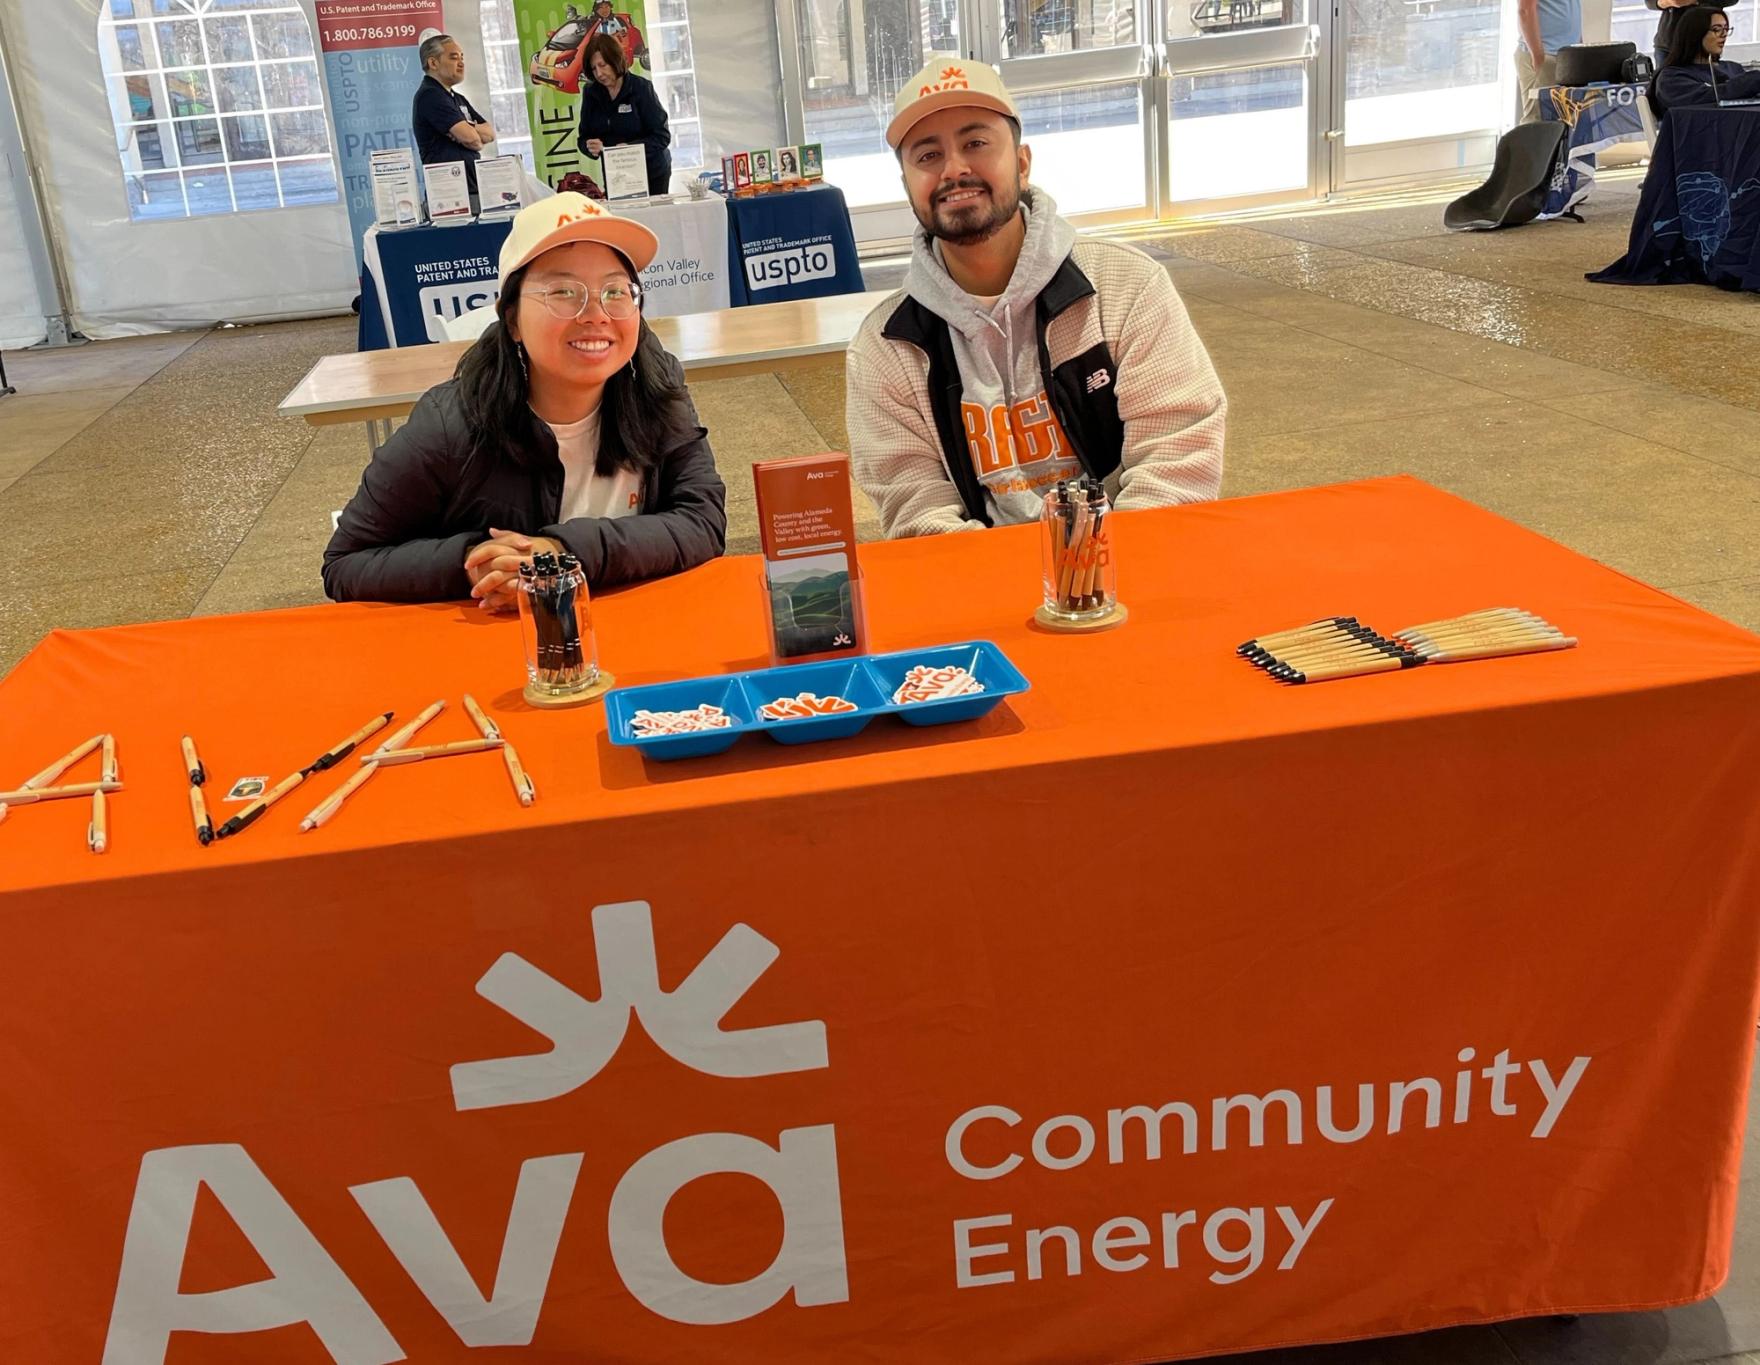 Two Ava employees at an event